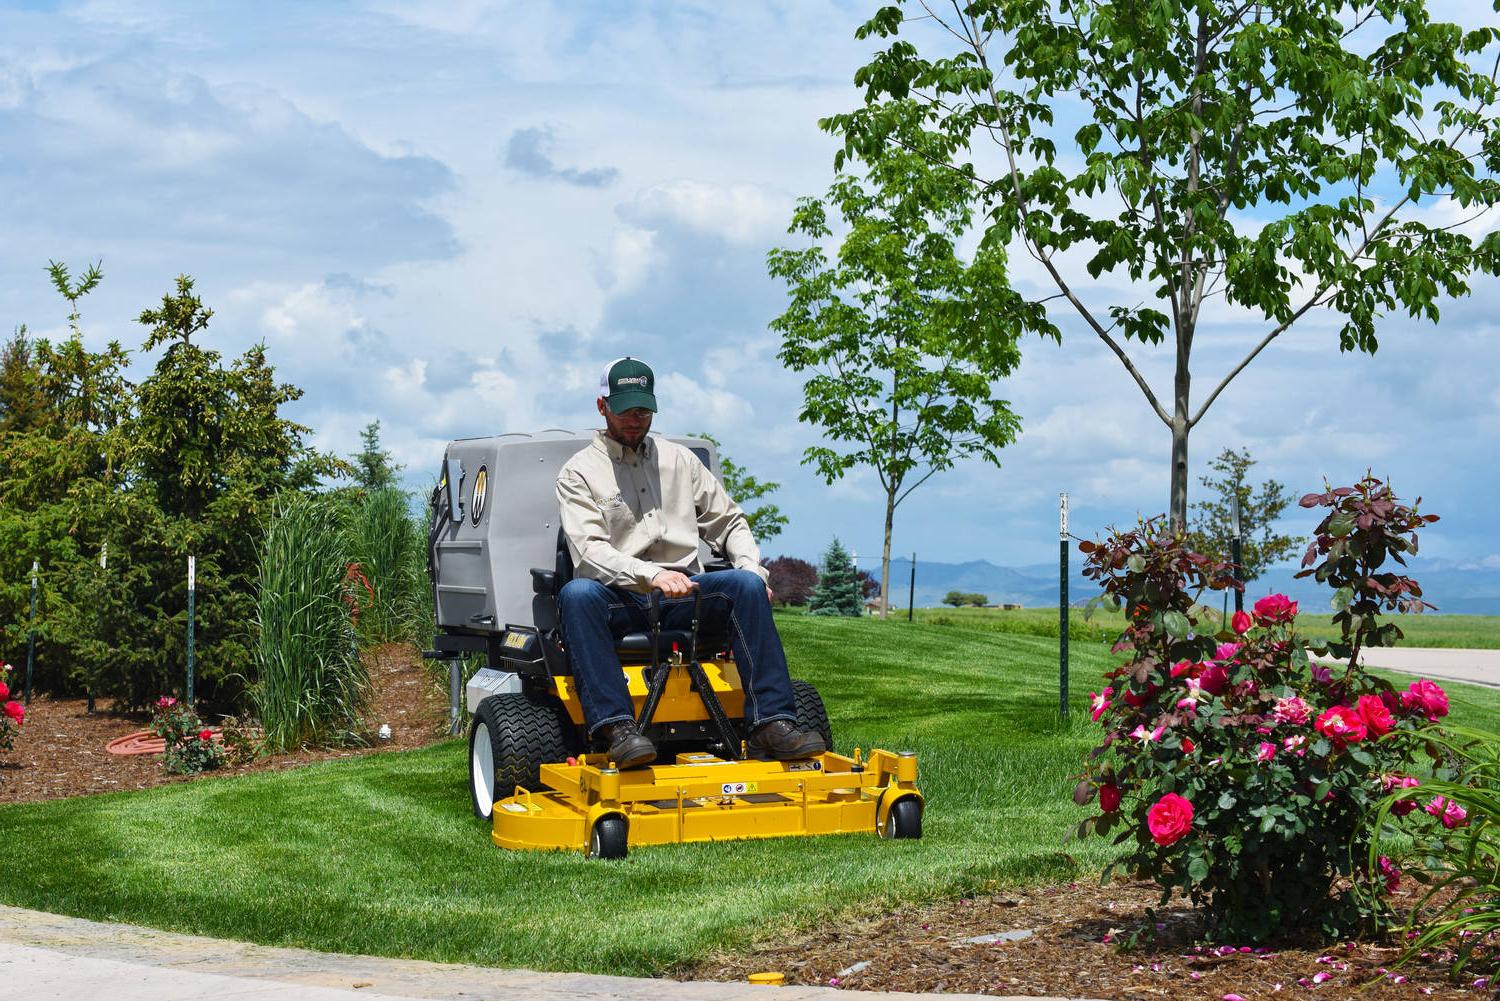 Now is the perfect time to check out the full line of versatile mowers available from Walker Manufacturing!